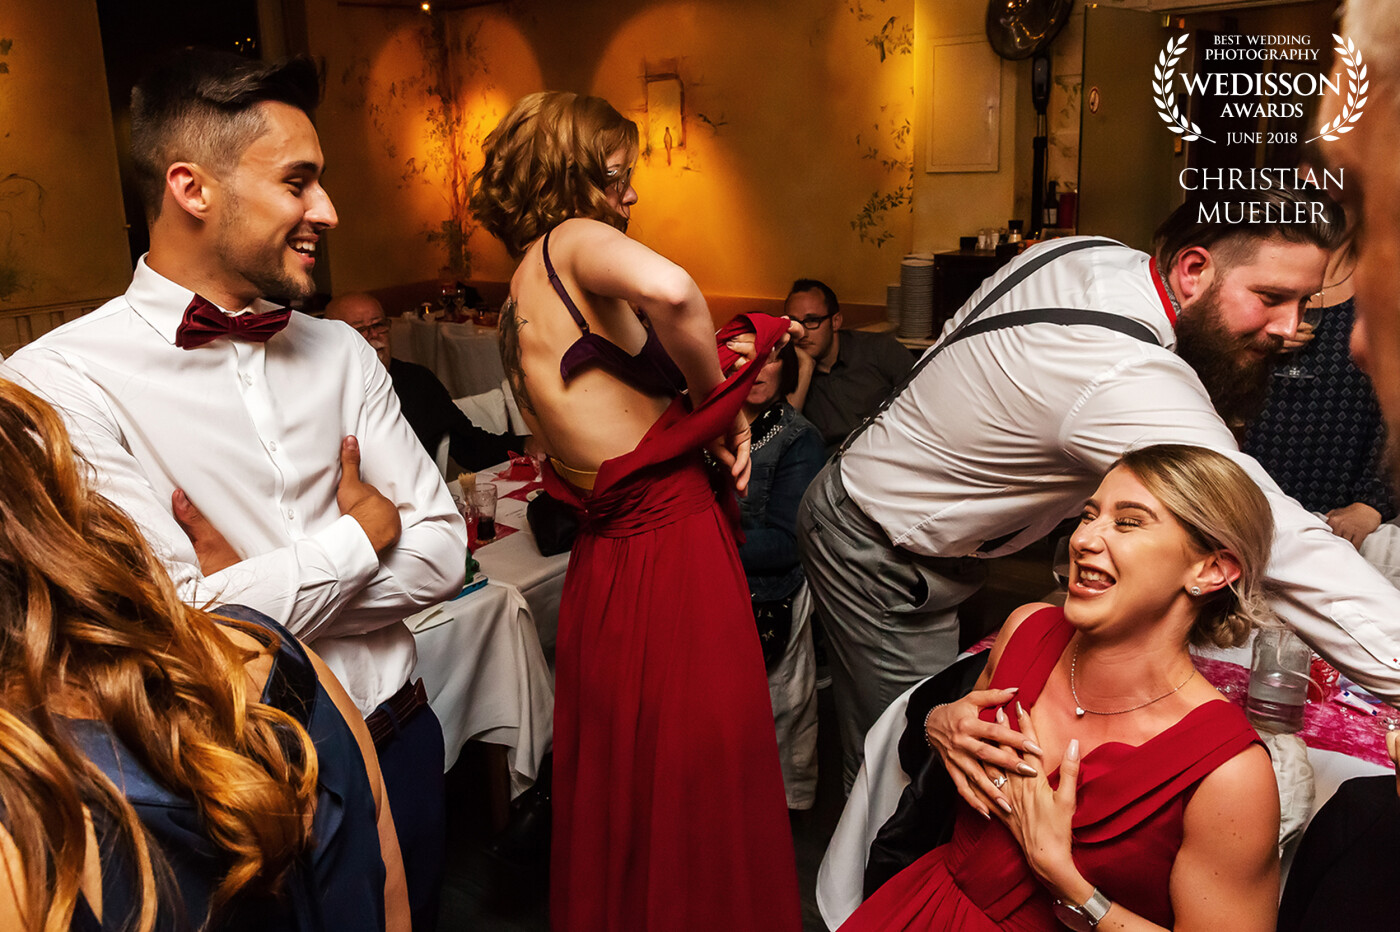 It was a great and funny wedding celebration of Alessia and Oliver. In this scene the amazing guests played the game "Musical Chairs" in a variation and had the job to get a bra. I hurried to get the shot of this great moment.